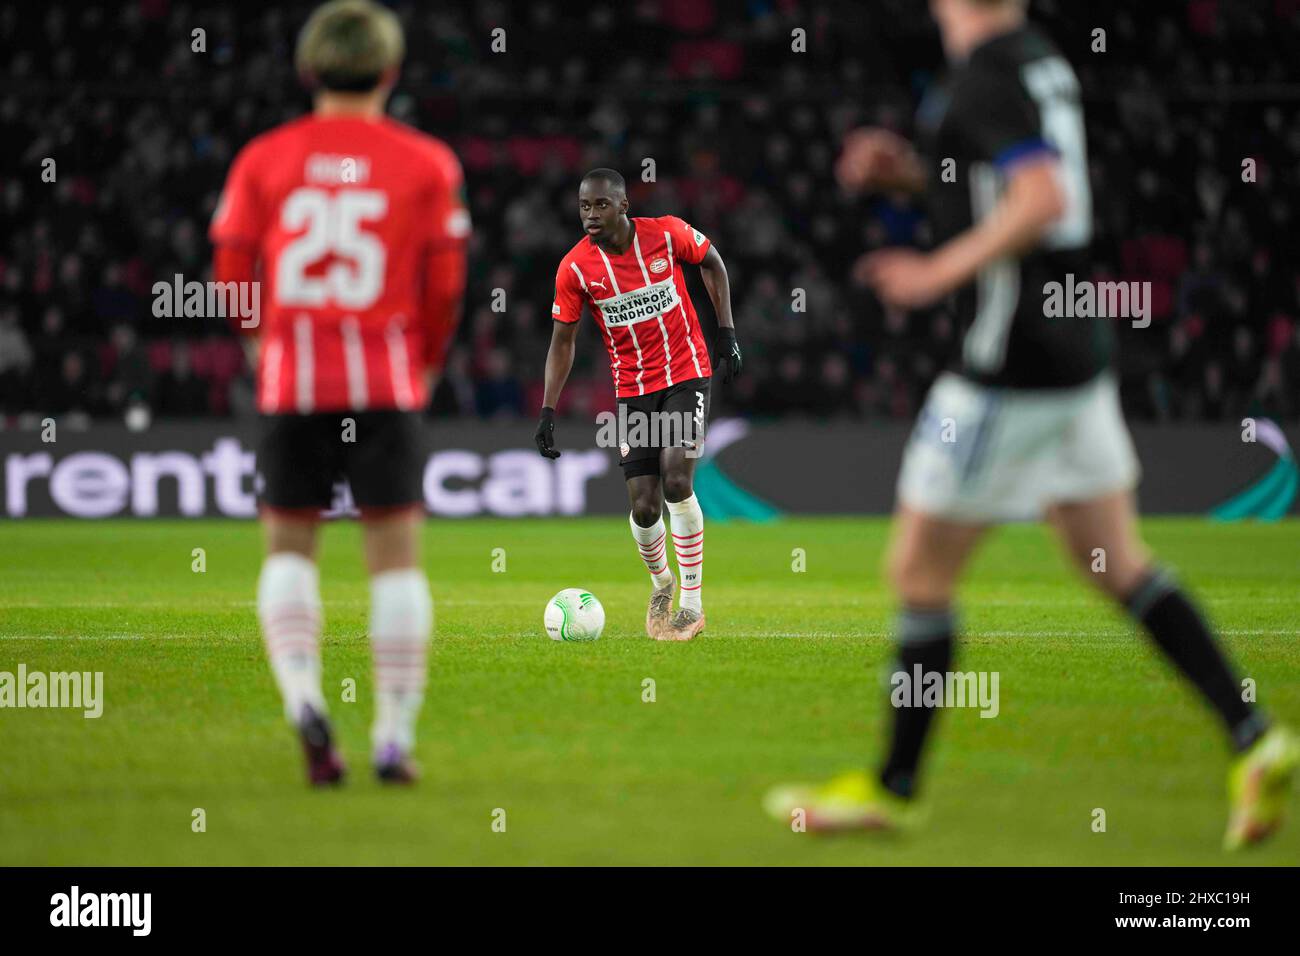 Philips Stadium, Eindhoven, Netherlands. 10th Mar, 2022. Jordan Teze of PSV Eindhoven controls the ball during PSV Eindhoven v FC KÃ¸benhavn, at Philips Stadium, Eindhoven, Netherlands. Kim Price/CSM/Alamy Live News Stock Photo